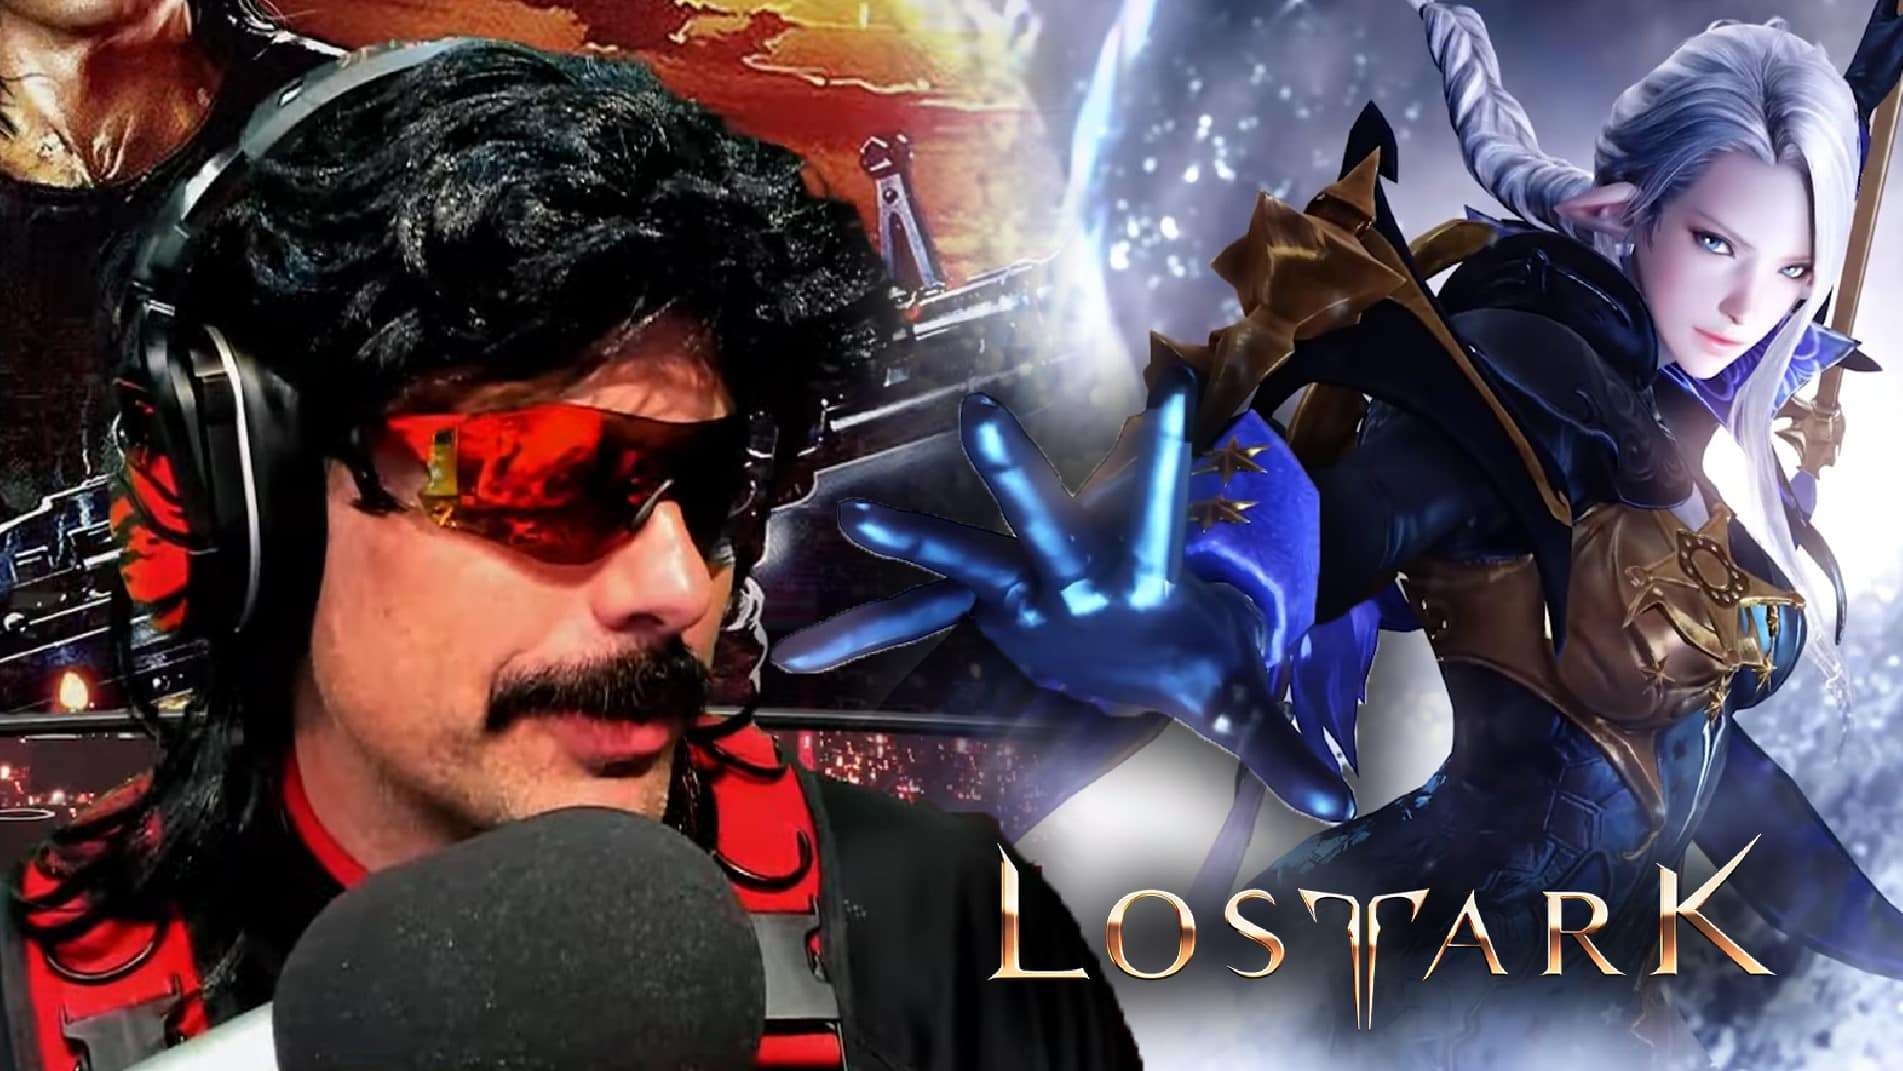 Dr Disrespect next to Lost Ark atwork